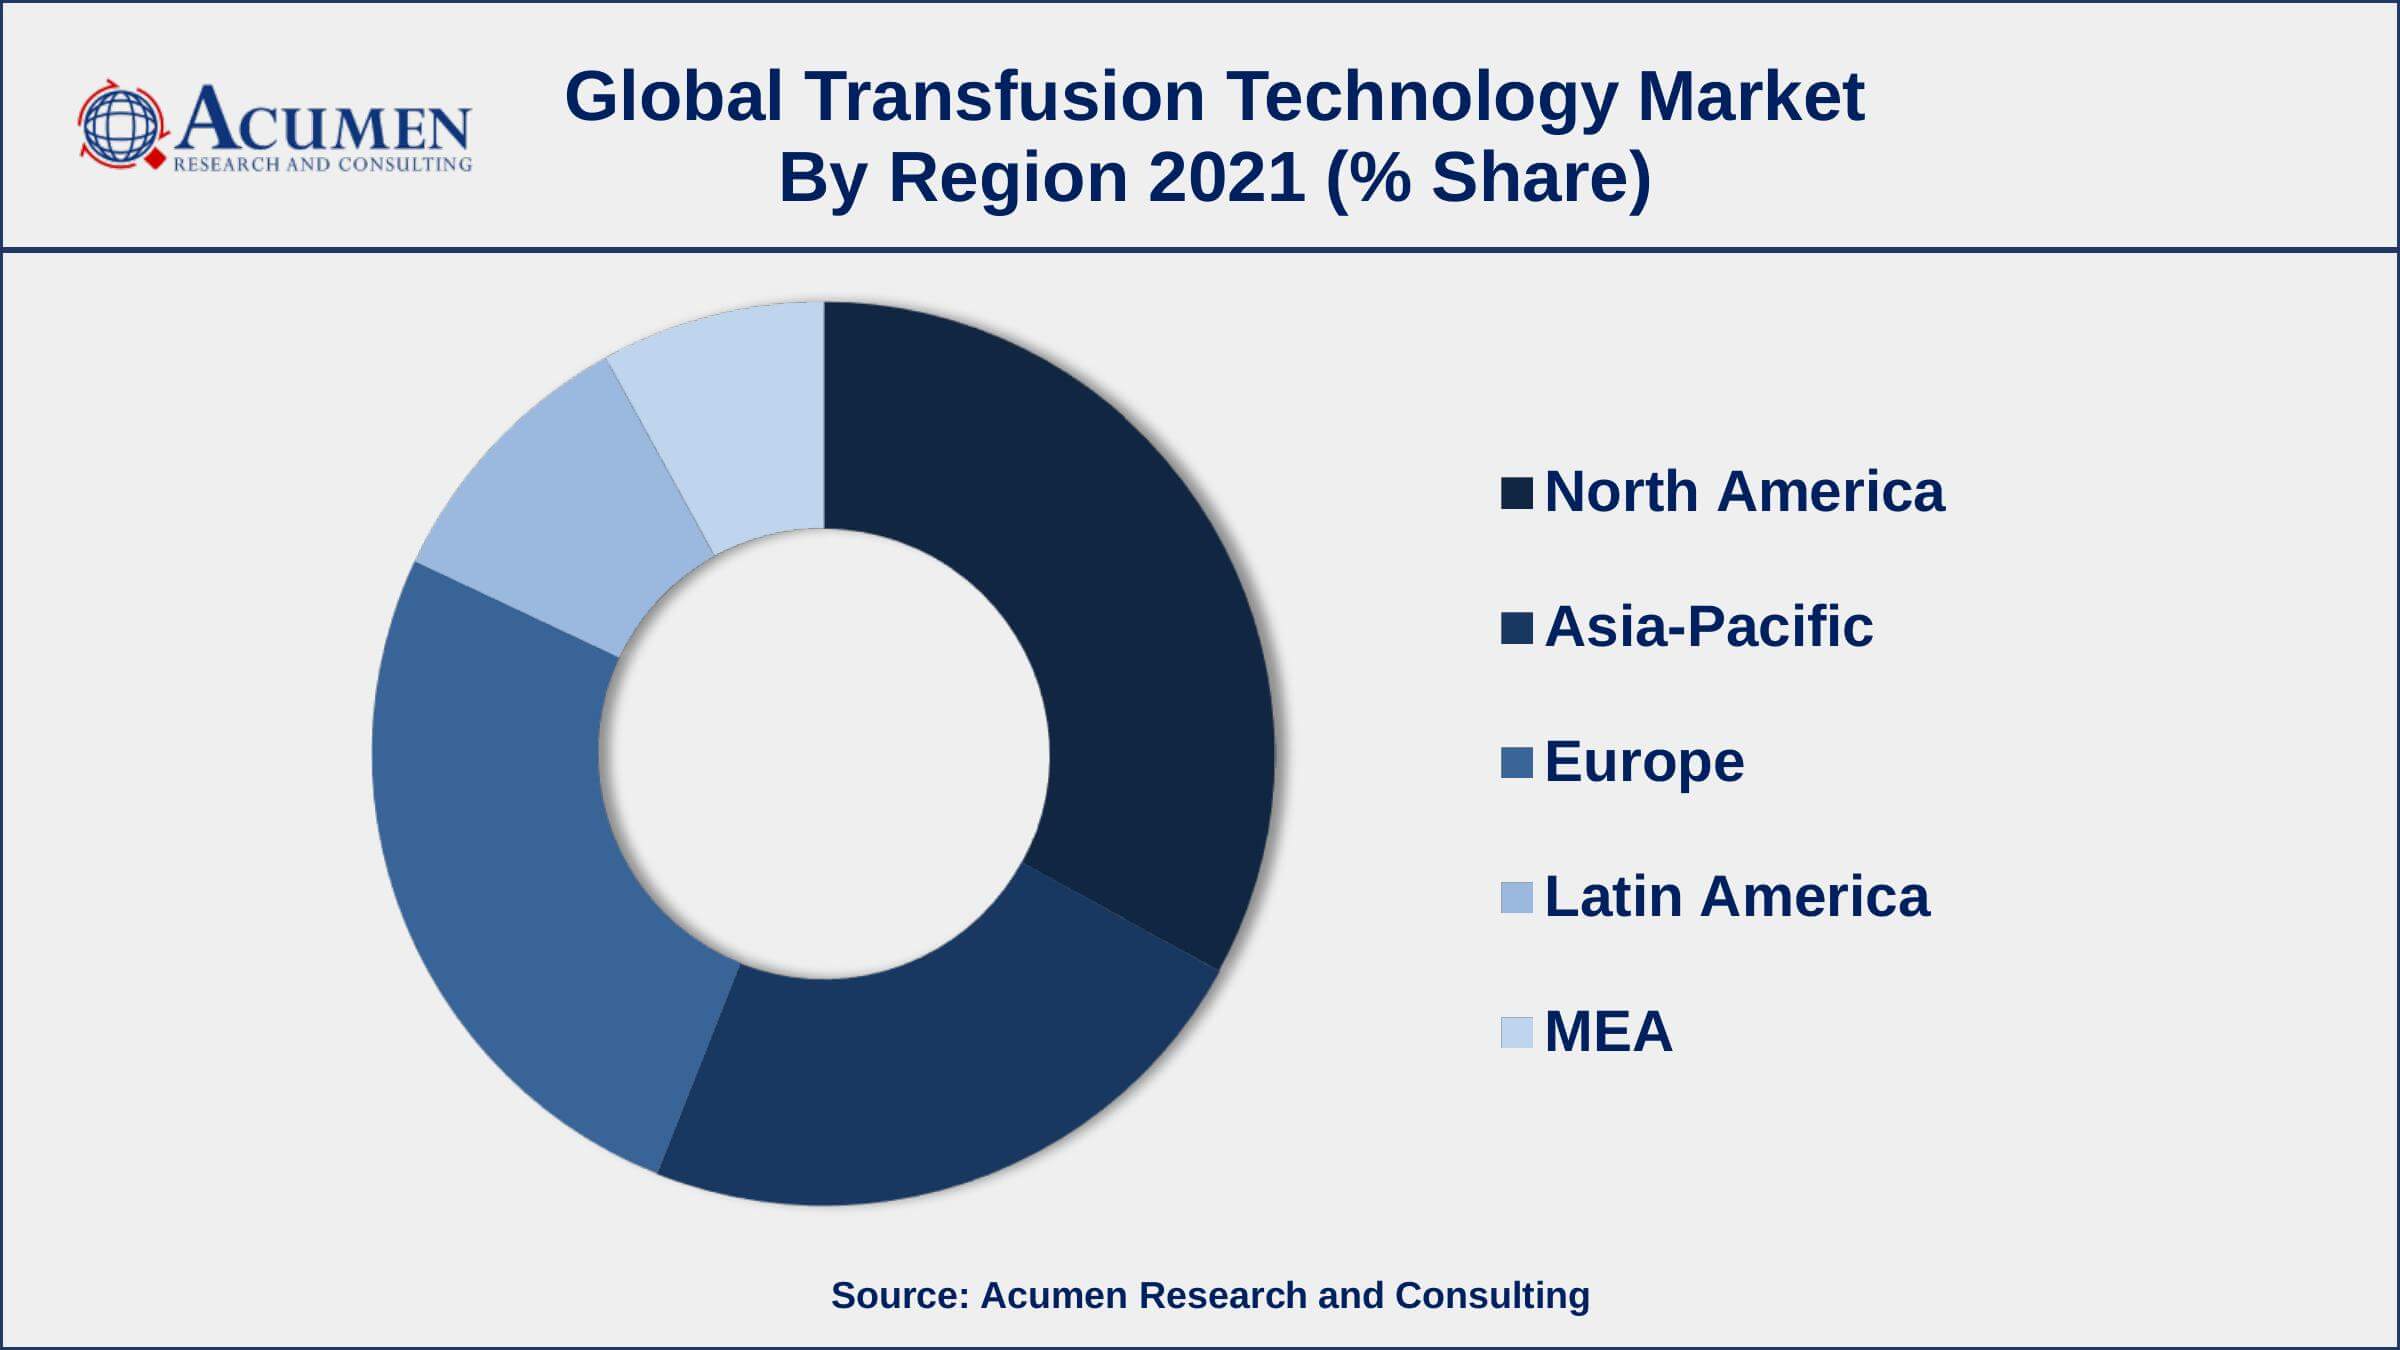 Increasing number of accidents and trauma cases, drives the transfusion technology market size